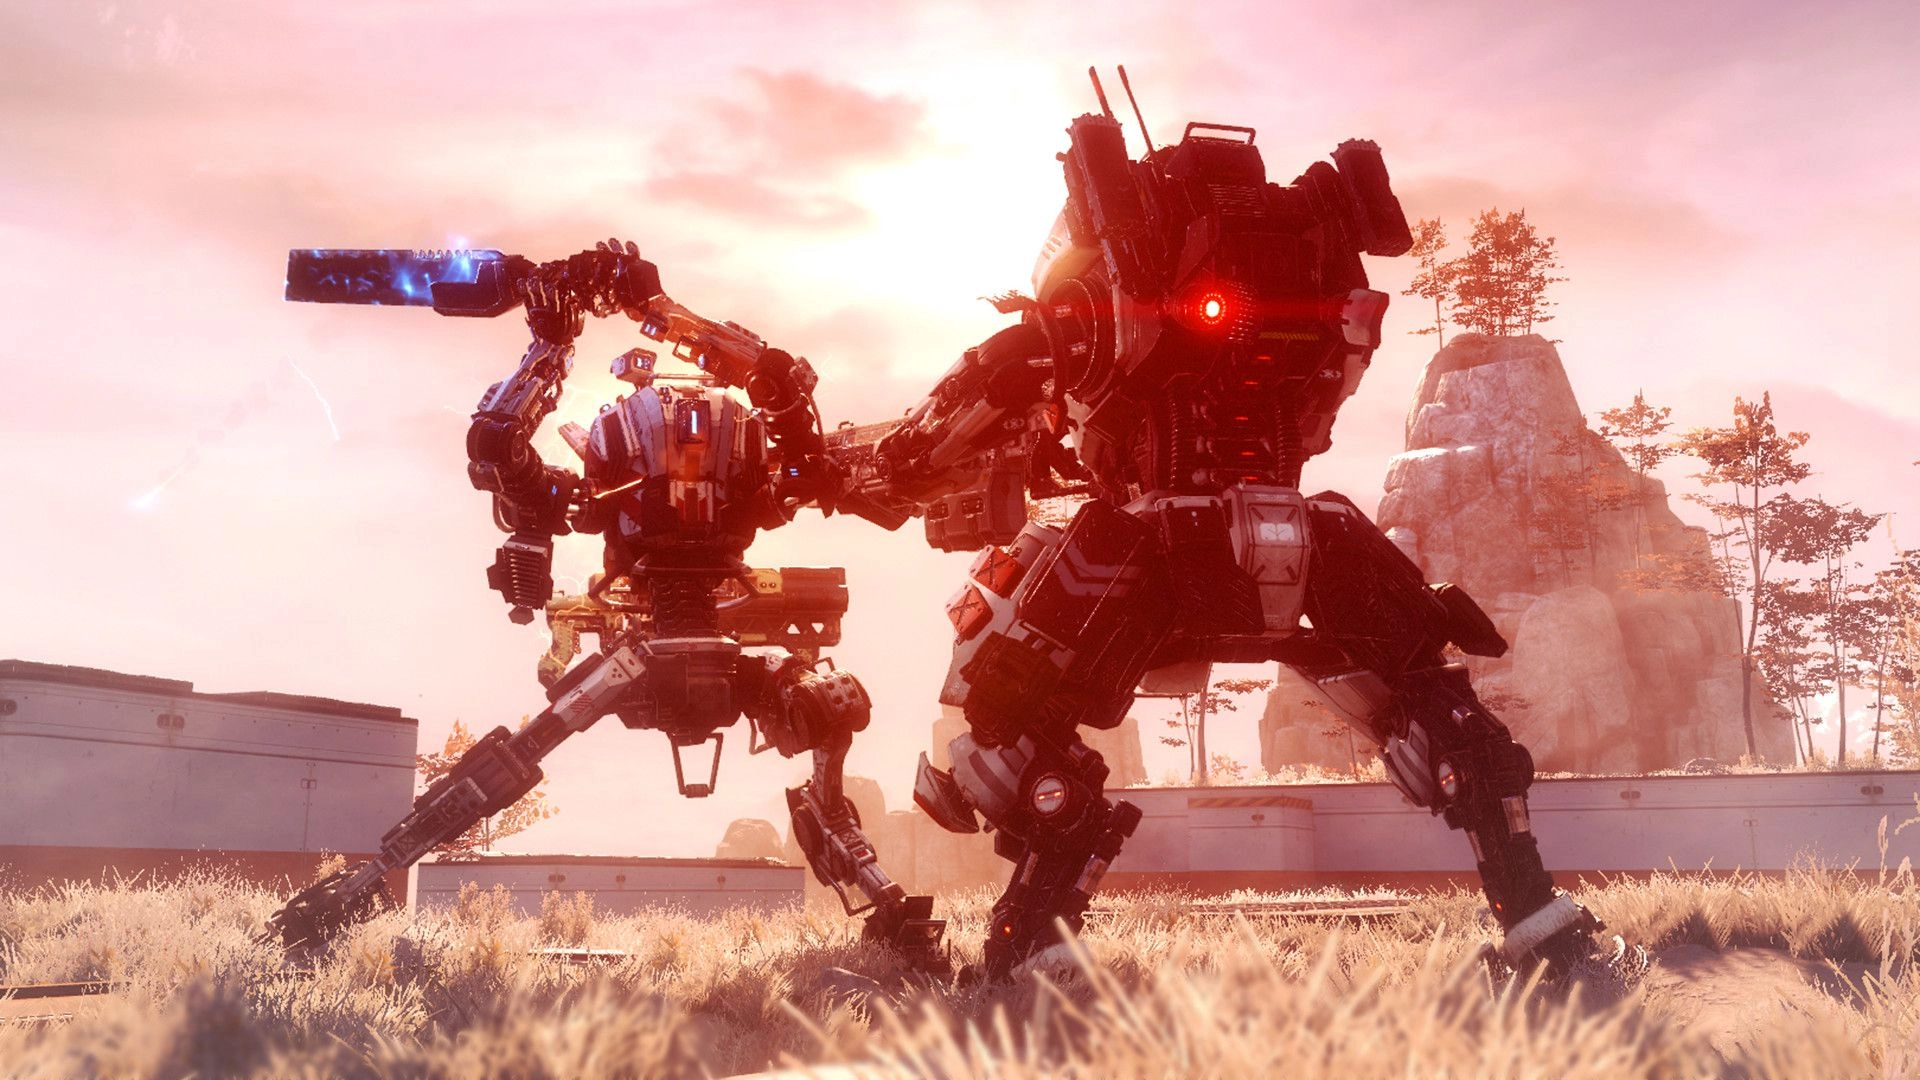 Titanfall 3 Rumors: A Spicy Mystery or Trolling Masterclass?